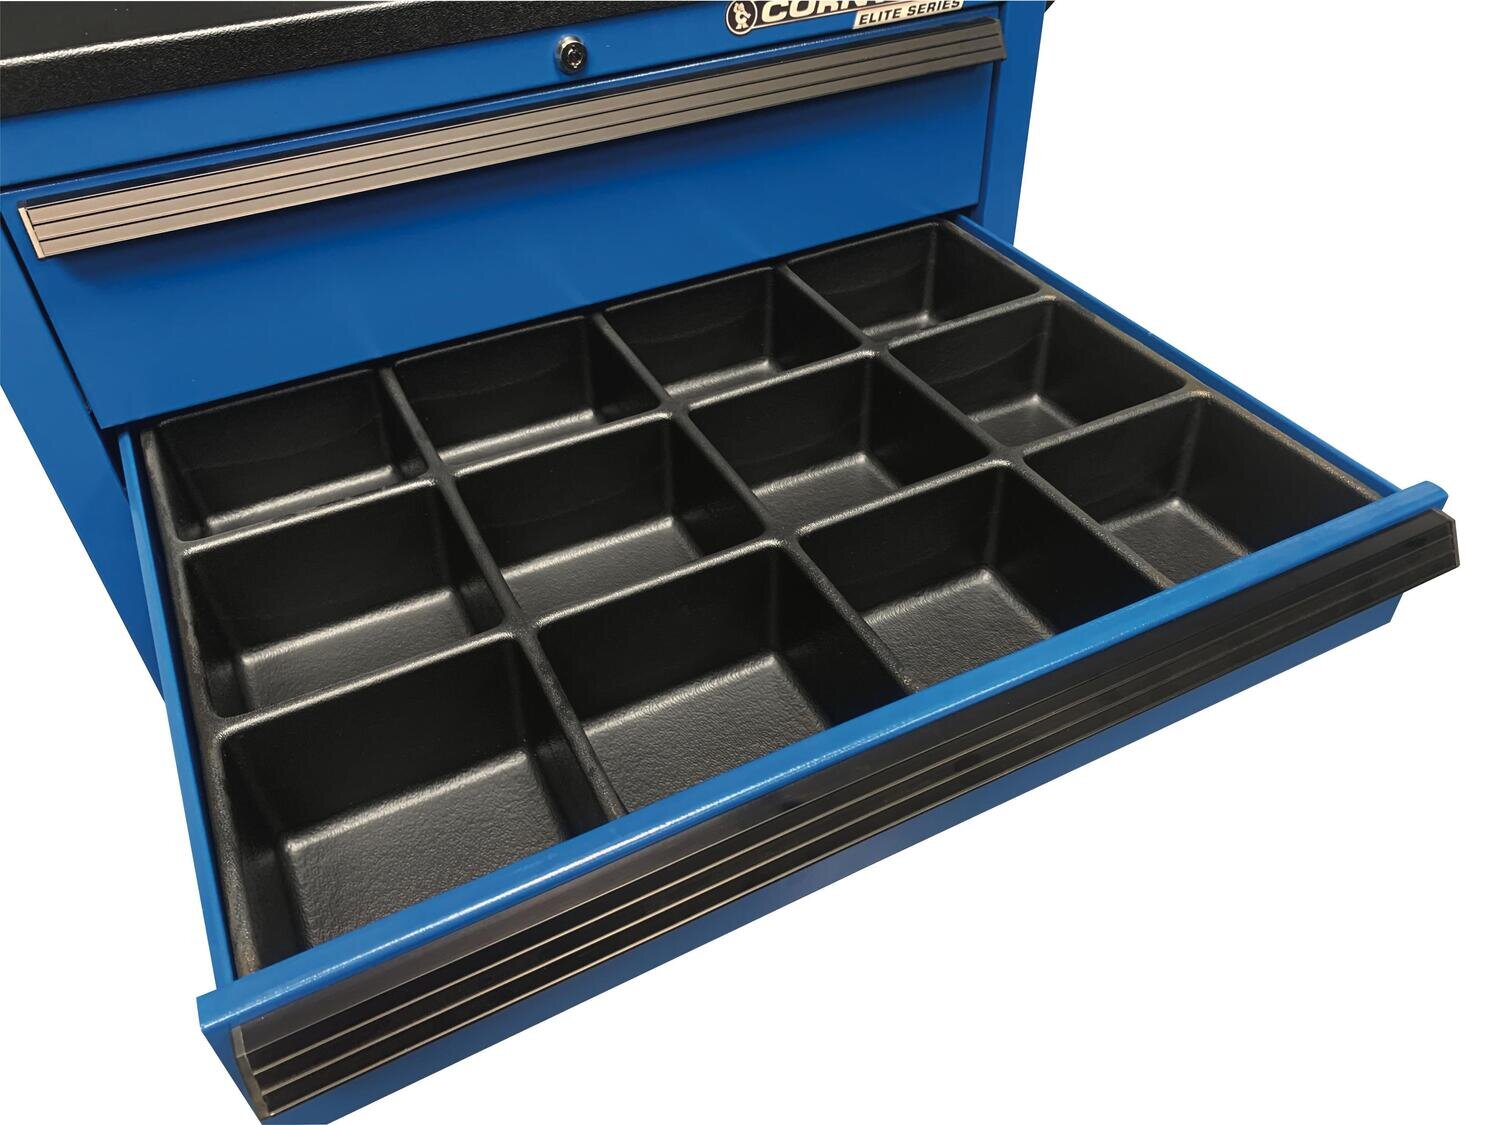 KMC81932 - (DSO) 29" Elite Series™ Roller Cabinet 12-Compartment Drawer Organizer